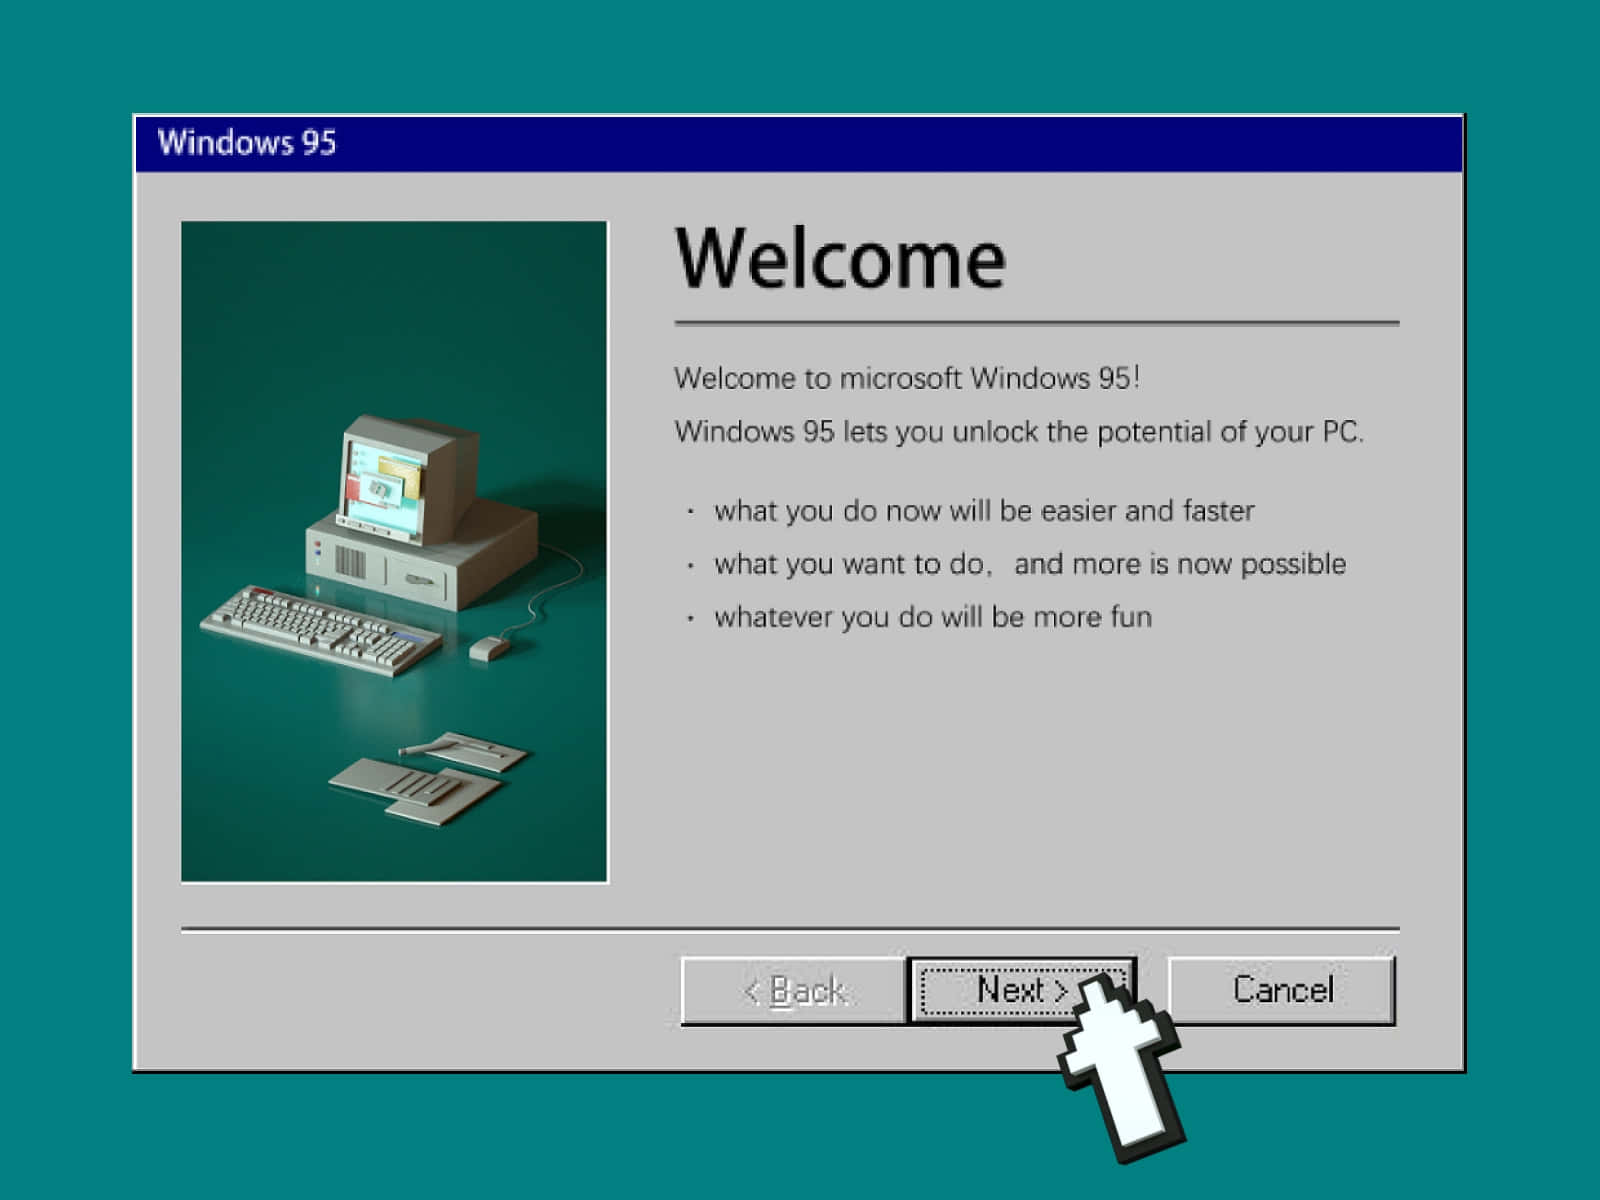 "Go back to the 90s with Windows 95!"